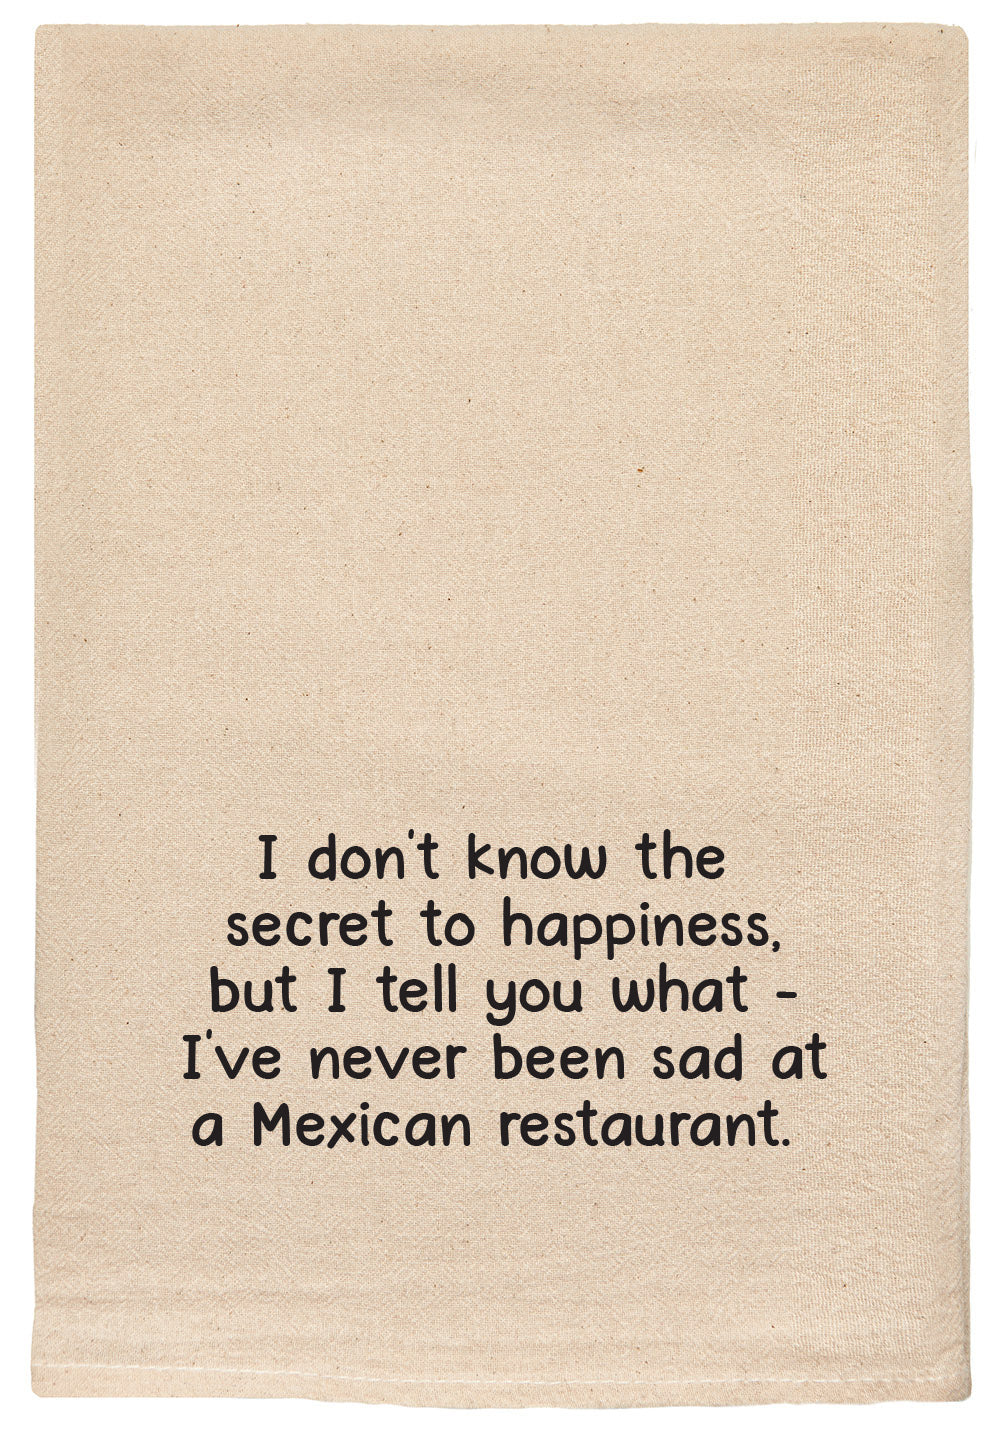 I don't know the secret to happiness, but I tell you what - I've never been sad at a Mexican Restaurant.